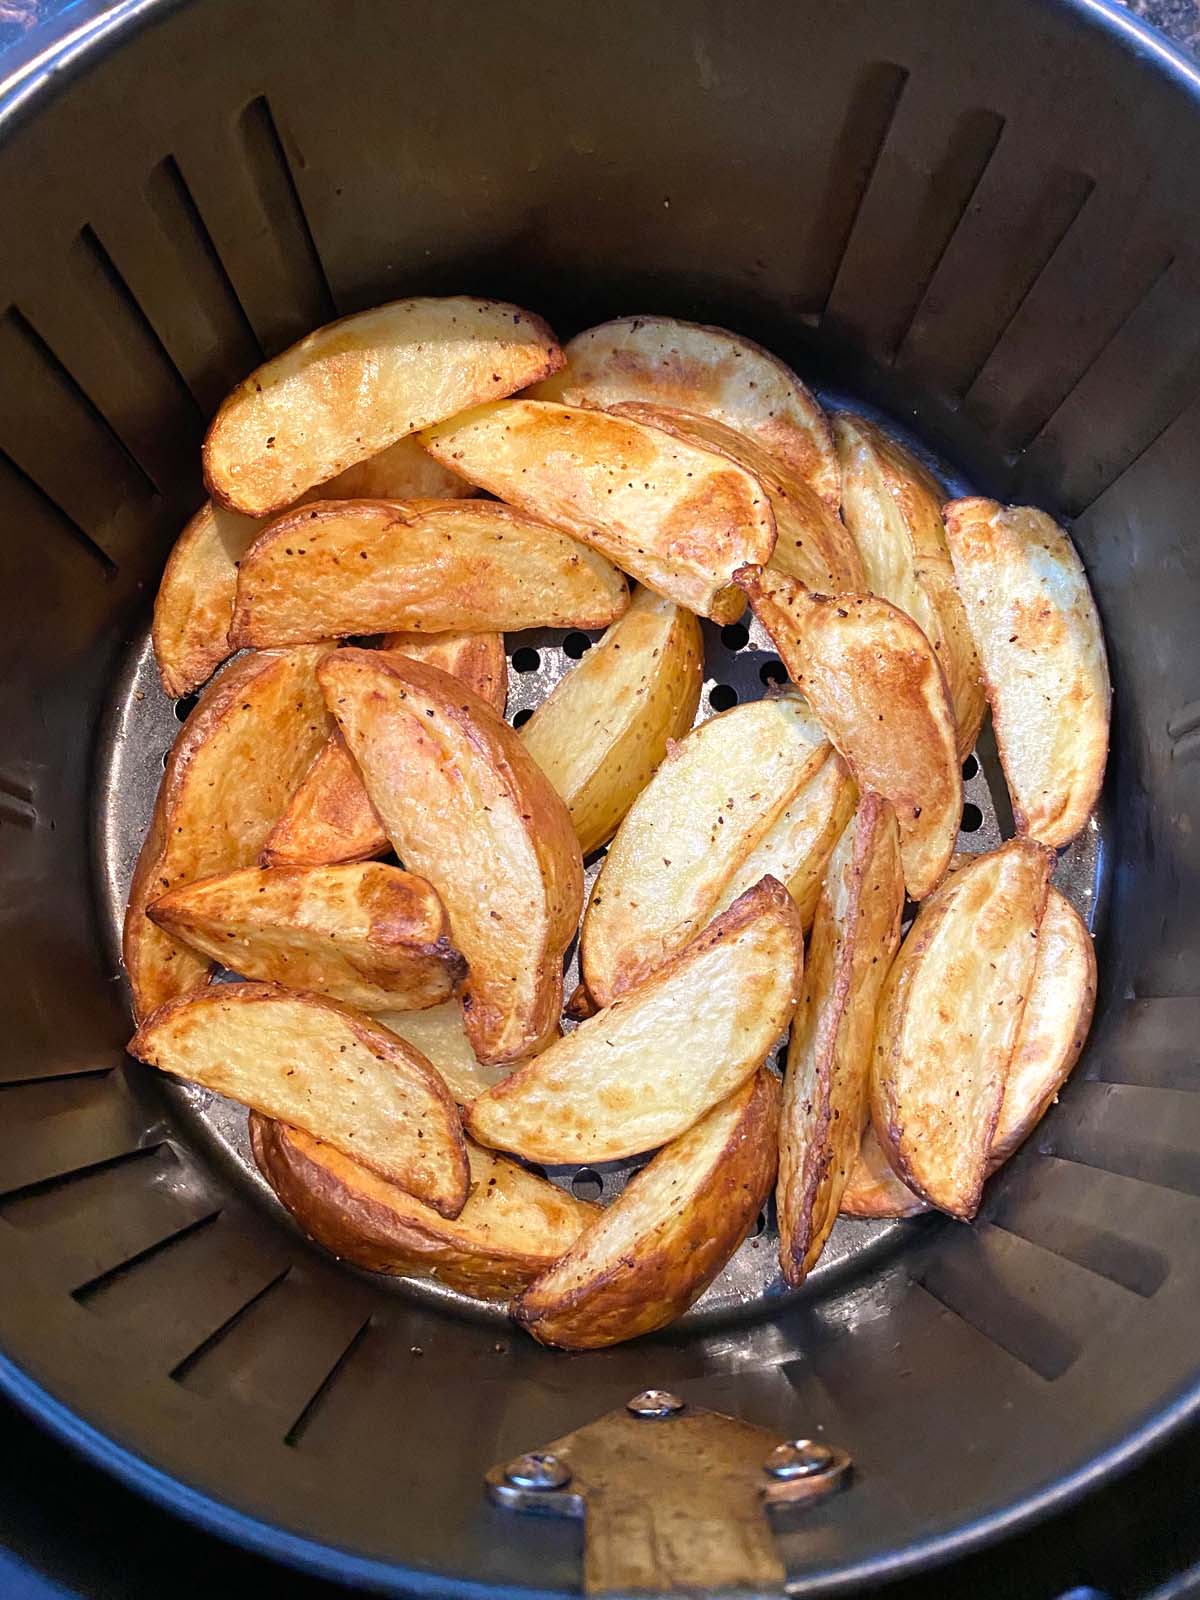 Cooked potato wedges in the air fryer.